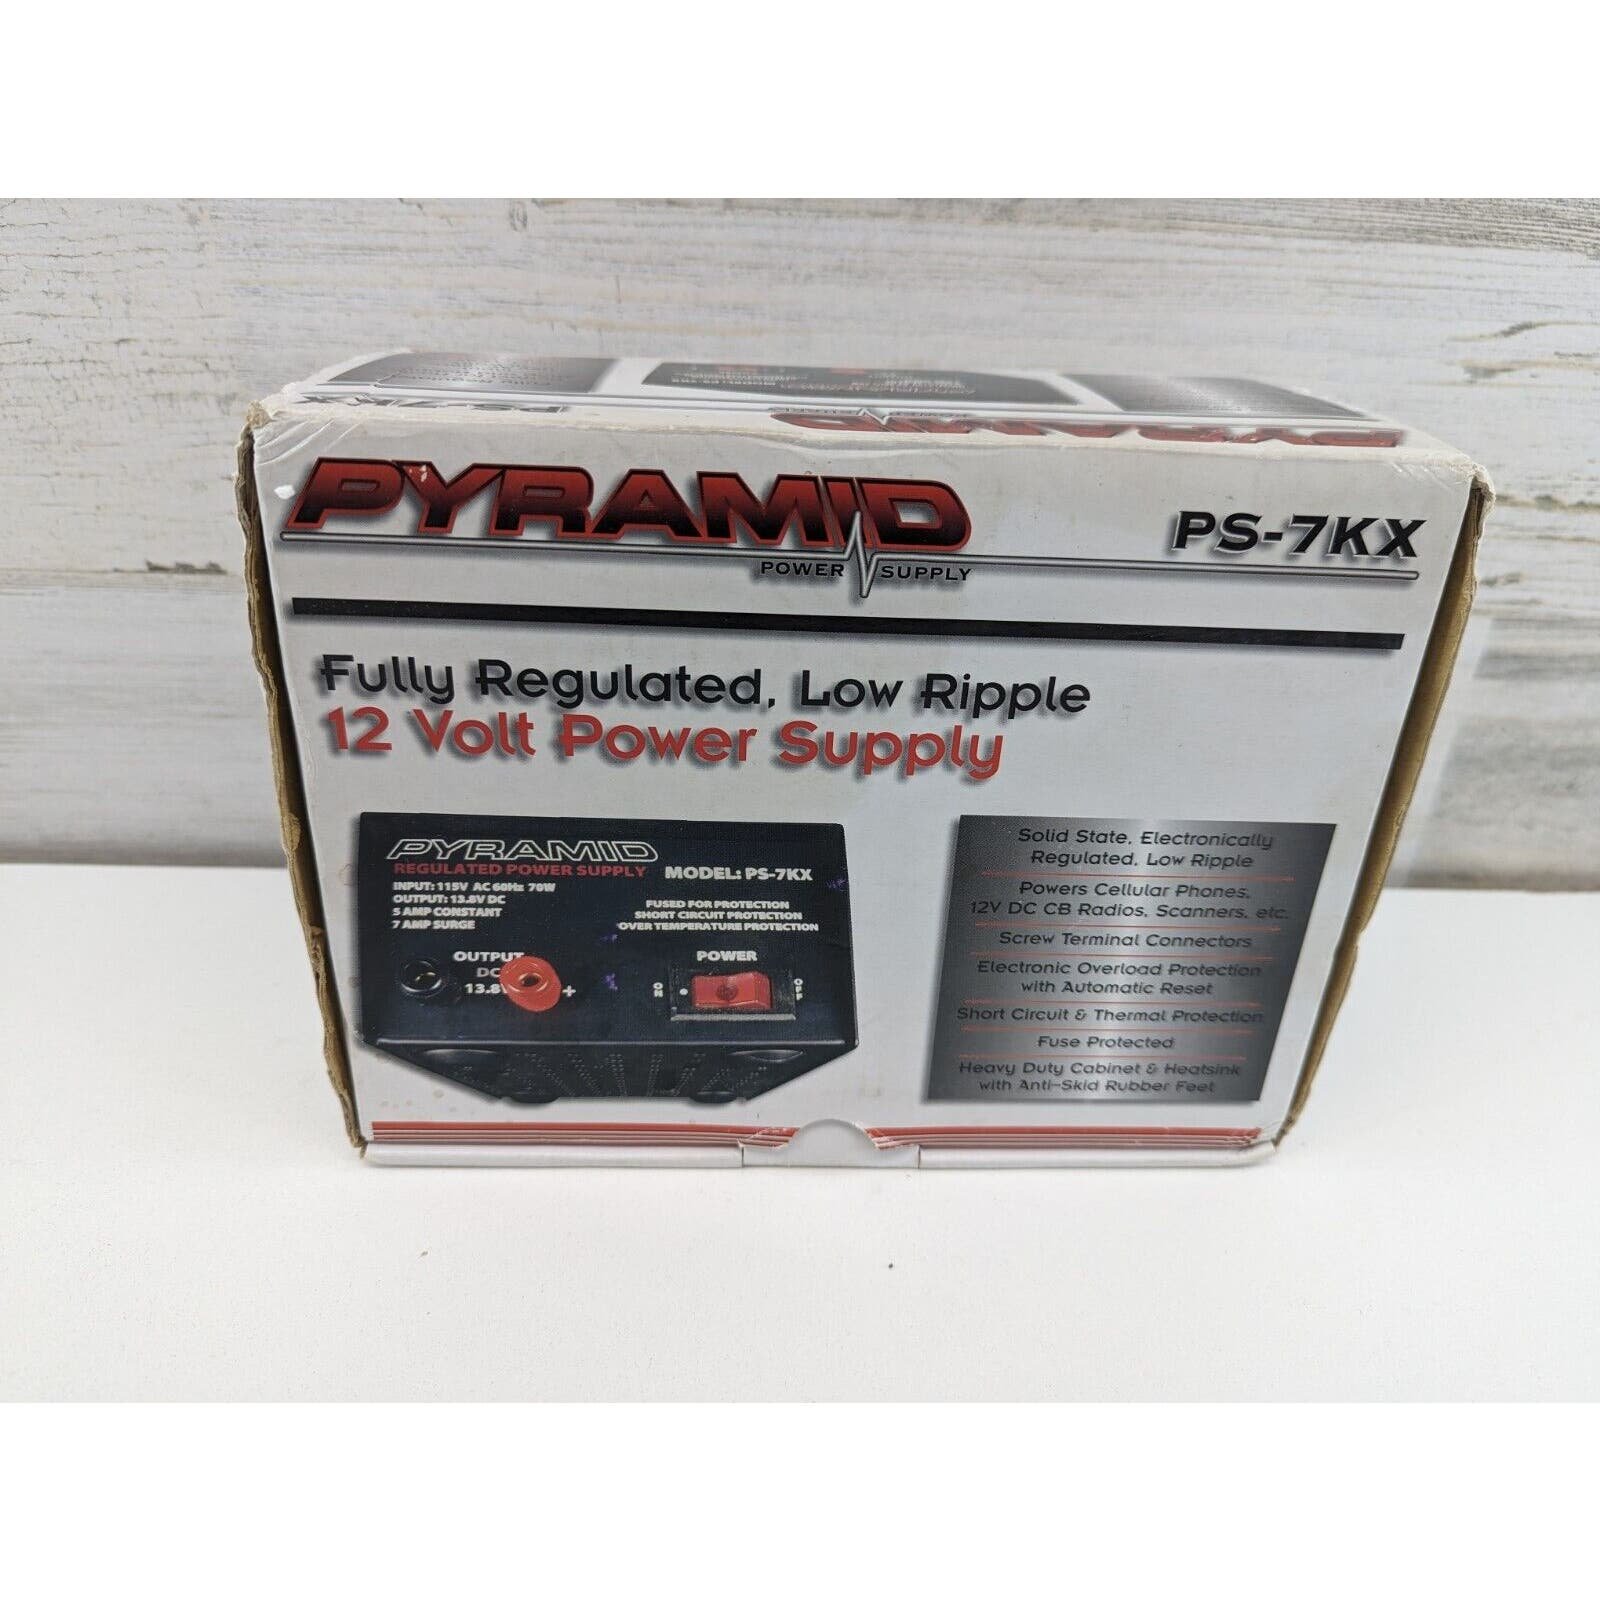 Pyramid Ps7kx 5 Amperage 70 Watts Power Supply For Phones, Cb Radios, Scanners i3E7sQpTu